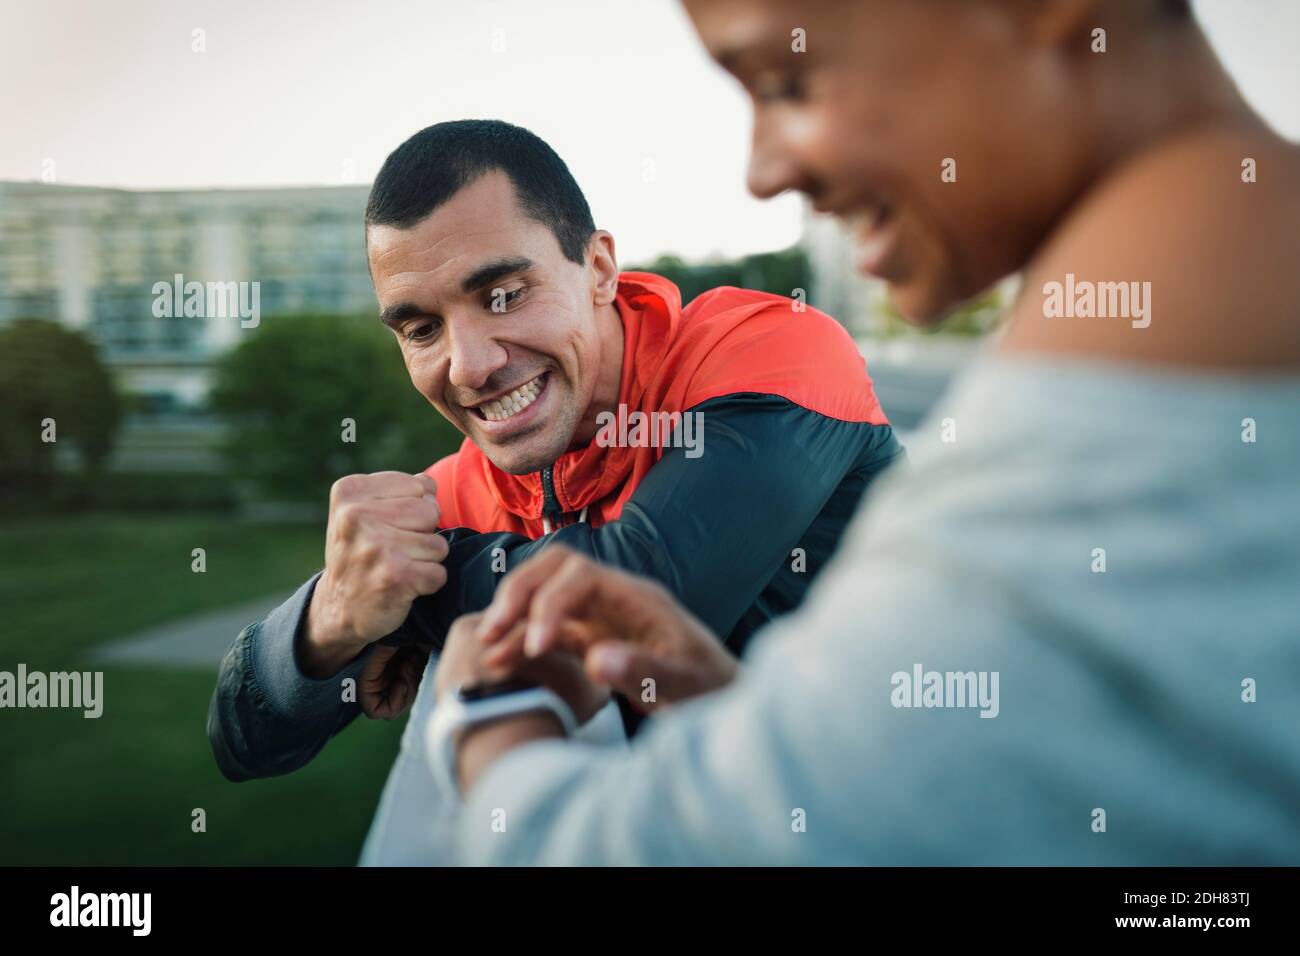 Man celebrating victory while woman checking time on smart watch Stock Photo